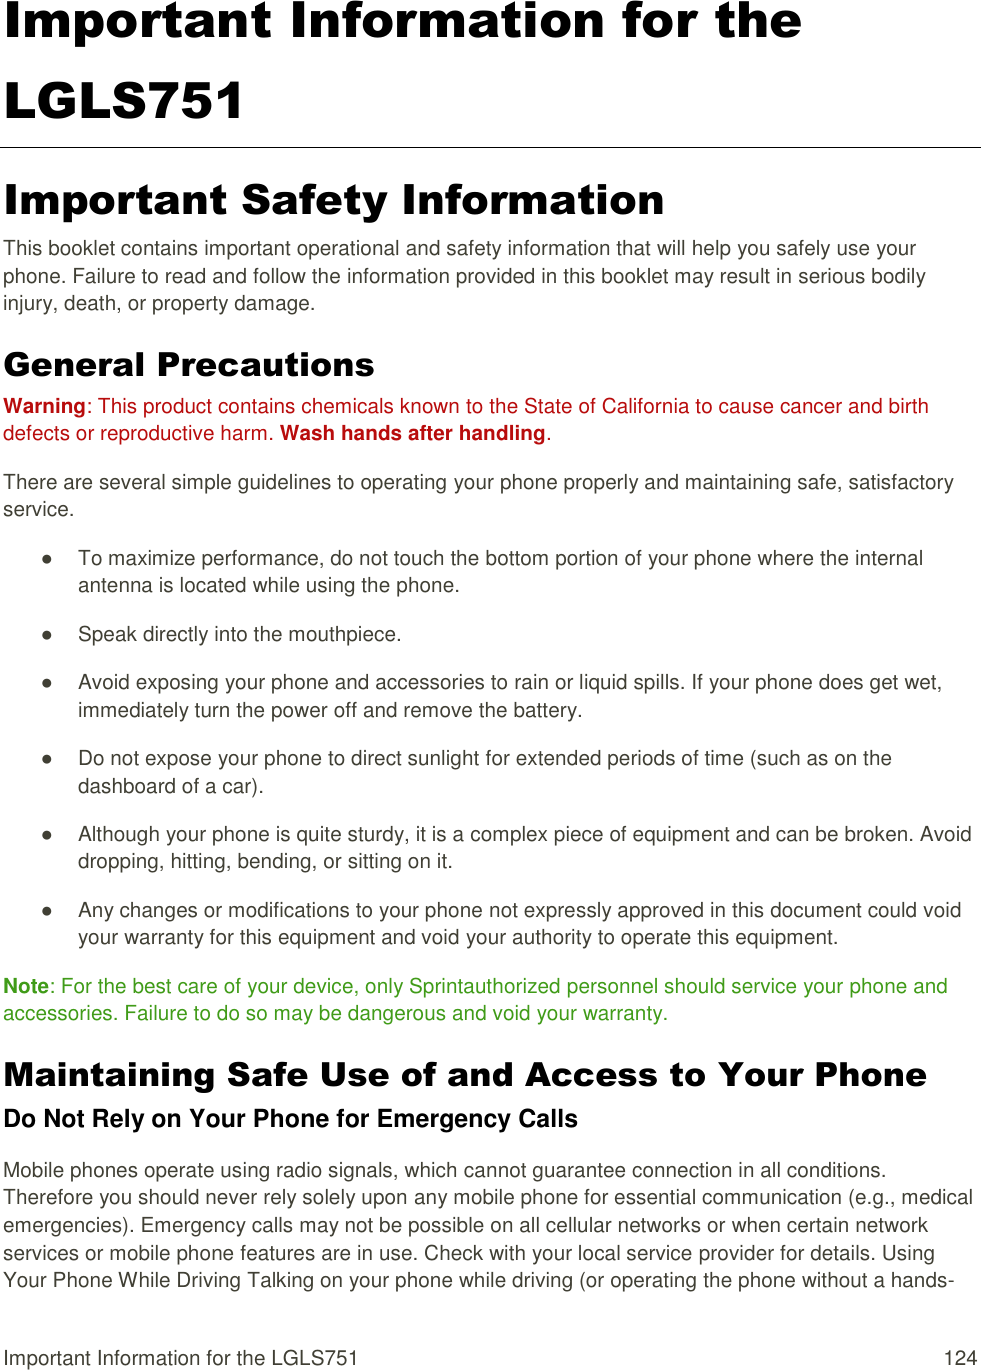 Important Information for the LGLS751  124 Important Information for the LGLS751 Important Safety Information This booklet contains important operational and safety information that will help you safely use your phone. Failure to read and follow the information provided in this booklet may result in serious bodily injury, death, or property damage. General Precautions Warning: This product contains chemicals known to the State of California to cause cancer and birth defects or reproductive harm. Wash hands after handling. There are several simple guidelines to operating your phone properly and maintaining safe, satisfactory service. ●  To maximize performance, do not touch the bottom portion of your phone where the internal antenna is located while using the phone. ●  Speak directly into the mouthpiece. ●  Avoid exposing your phone and accessories to rain or liquid spills. If your phone does get wet, immediately turn the power off and remove the battery. ●  Do not expose your phone to direct sunlight for extended periods of time (such as on the dashboard of a car). ●  Although your phone is quite sturdy, it is a complex piece of equipment and can be broken. Avoid dropping, hitting, bending, or sitting on it. ●  Any changes or modifications to your phone not expressly approved in this document could void your warranty for this equipment and void your authority to operate this equipment. Note: For the best care of your device, only Sprintauthorized personnel should service your phone and accessories. Failure to do so may be dangerous and void your warranty. Maintaining Safe Use of and Access to Your Phone Do Not Rely on Your Phone for Emergency Calls Mobile phones operate using radio signals, which cannot guarantee connection in all conditions. Therefore you should never rely solely upon any mobile phone for essential communication (e.g., medical emergencies). Emergency calls may not be possible on all cellular networks or when certain network services or mobile phone features are in use. Check with your local service provider for details. Using Your Phone While Driving Talking on your phone while driving (or operating the phone without a hands-